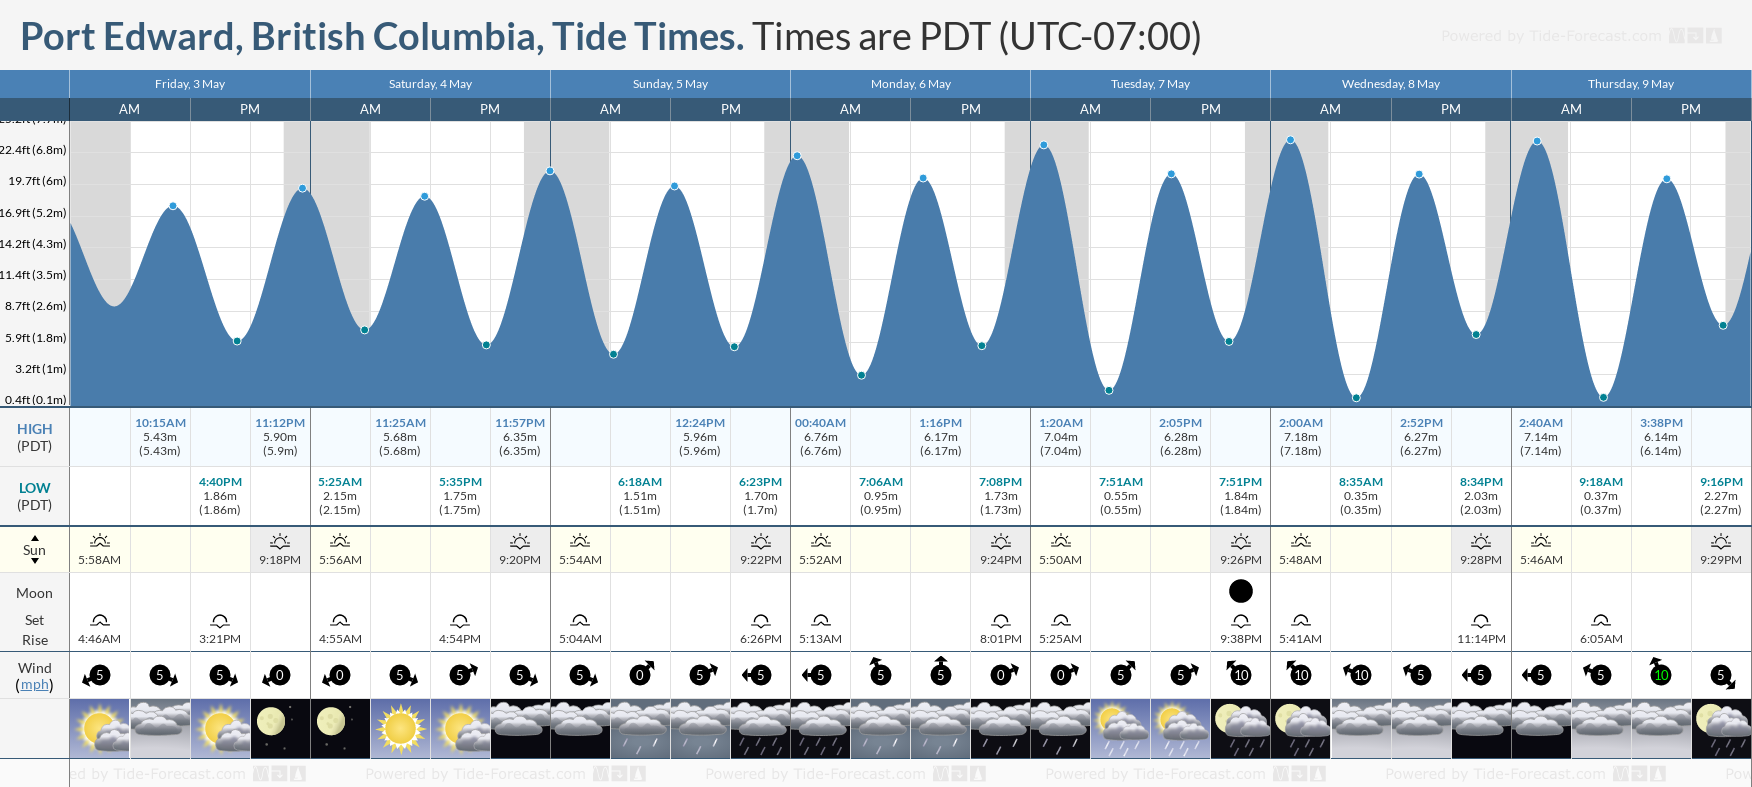 Port Edward, British Columbia Tide Chart including high and low tide tide times for the next 7 days